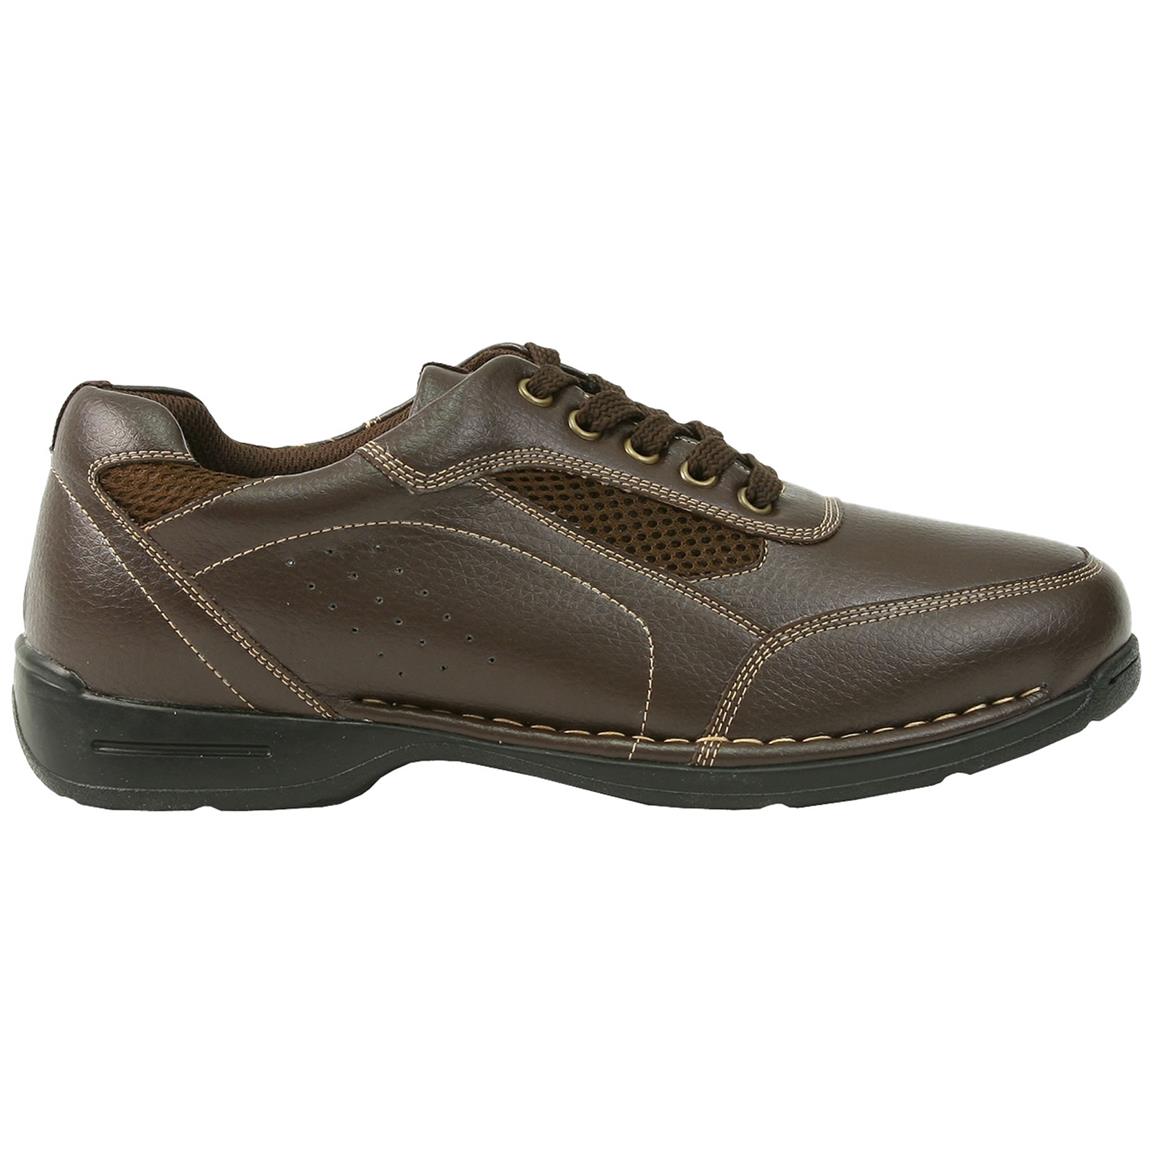 Men's Deer Stags® Verge Oxford Shoes - 615632, Casual Shoes at ...